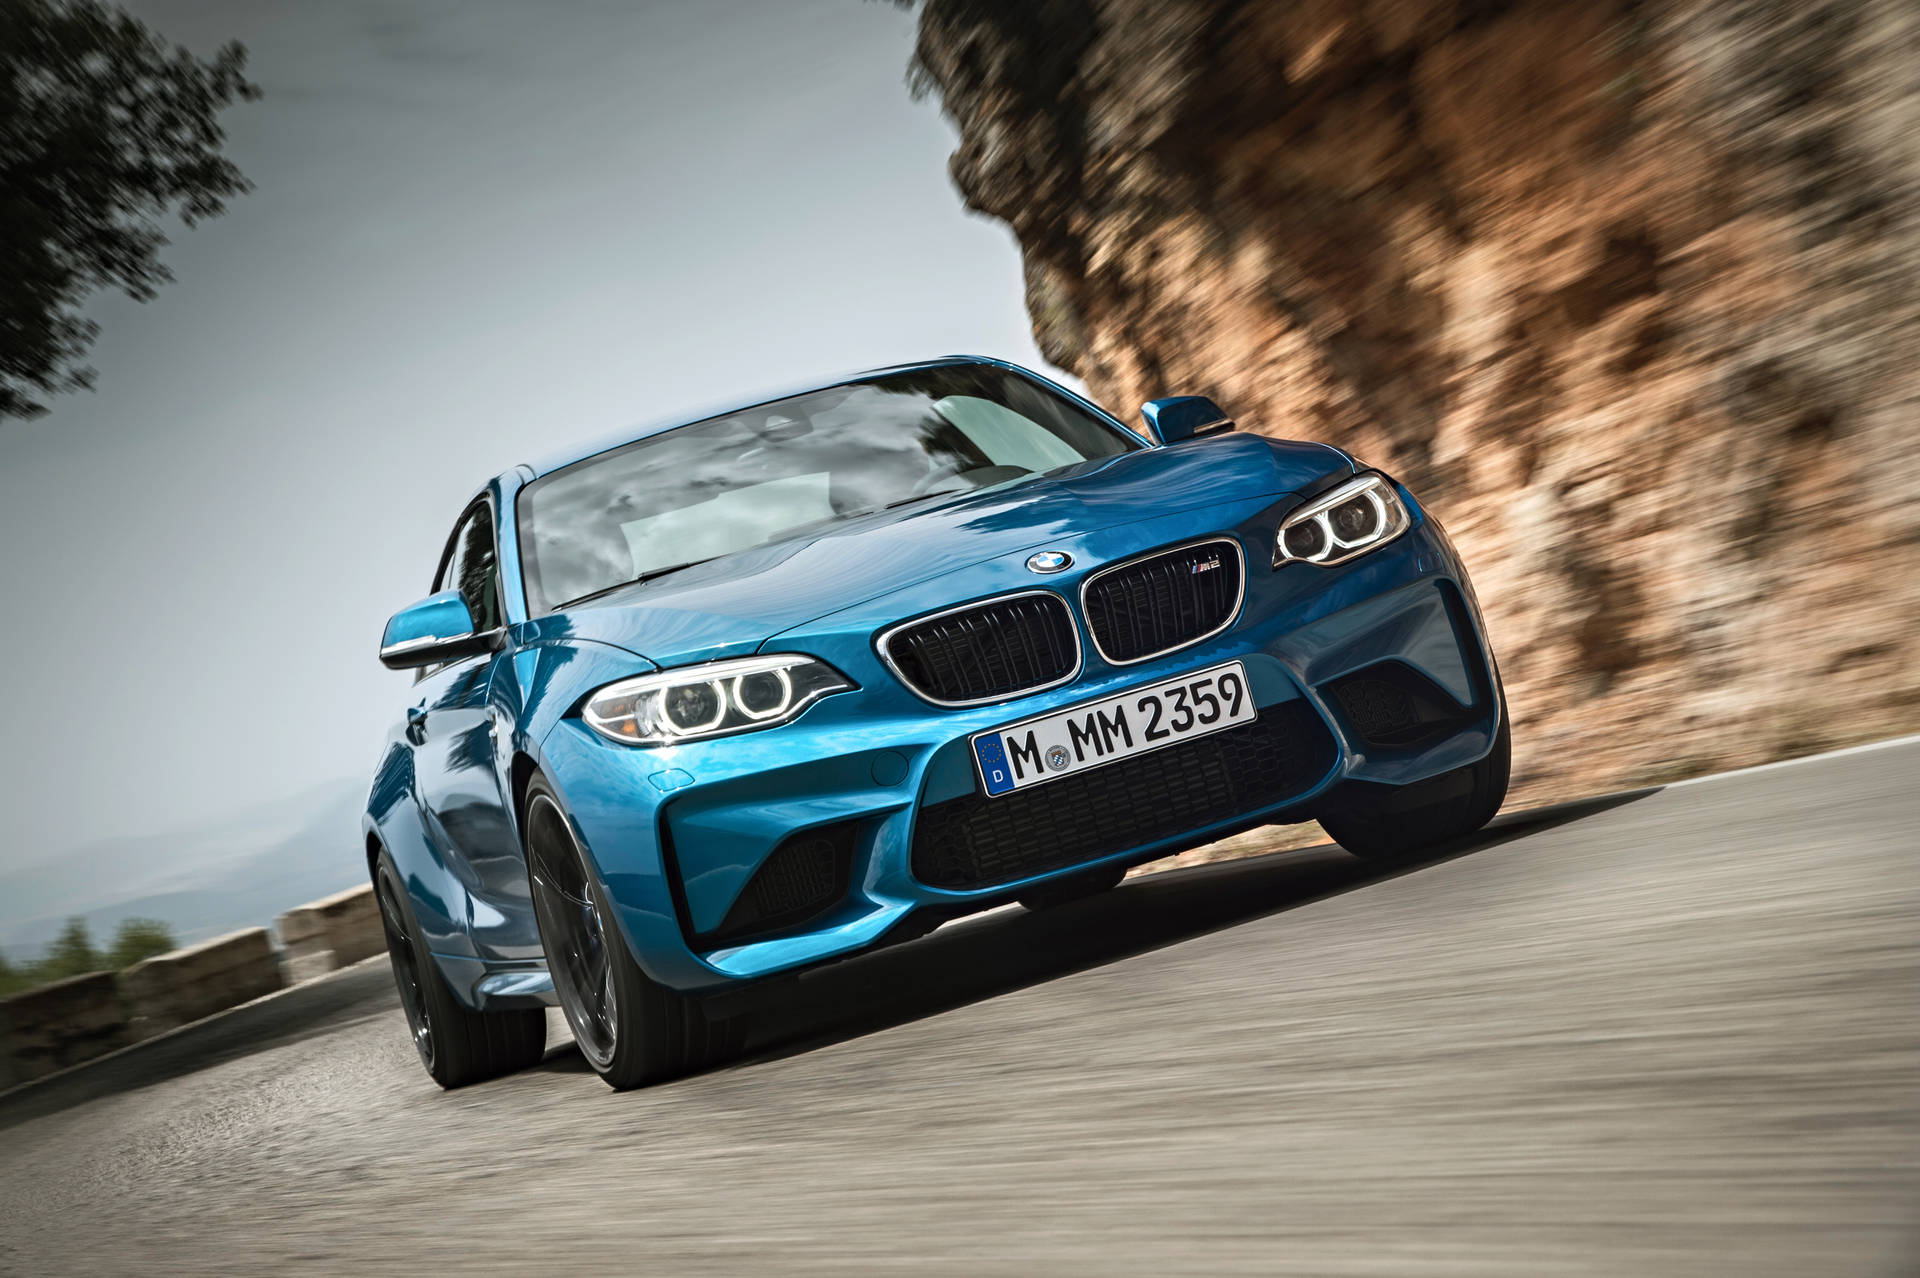 Free Bmw Wallpaper Downloads, [300+] Bmw Wallpapers for FREE |  